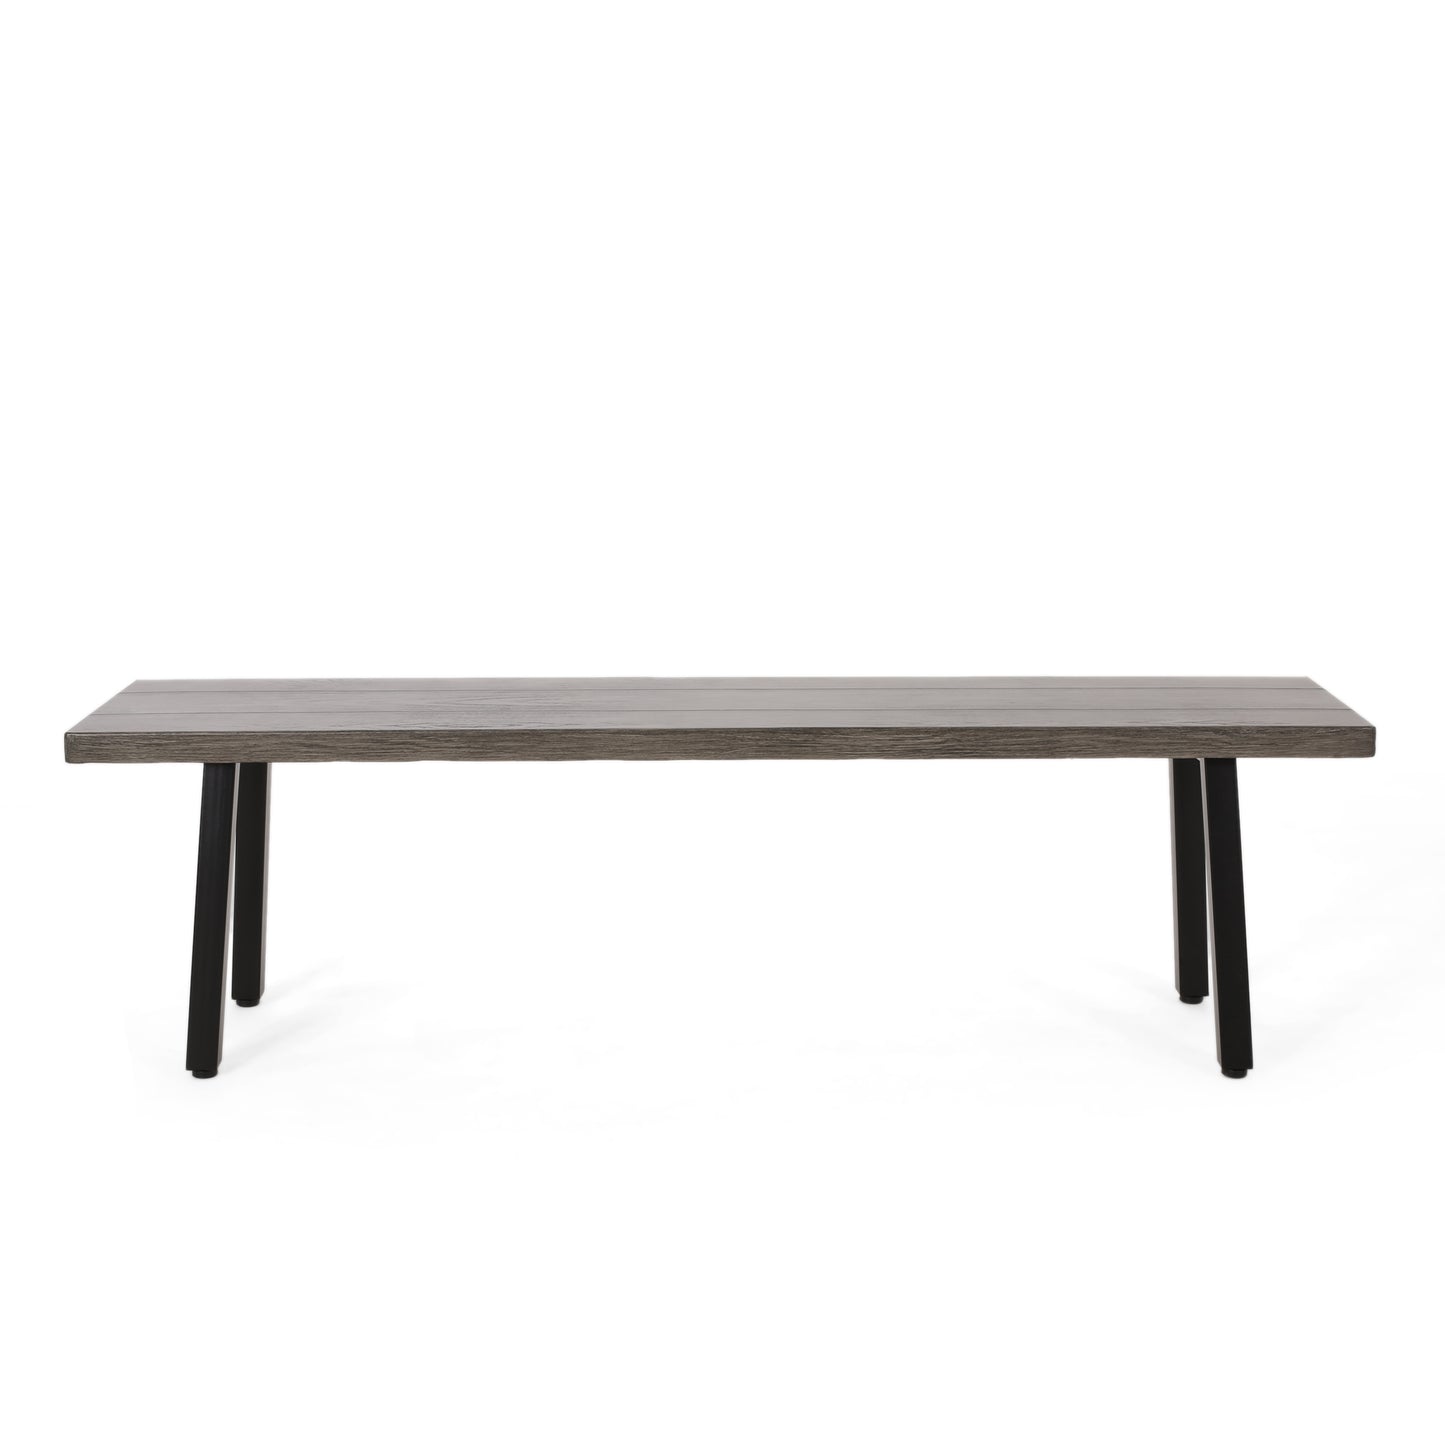 Altair Outdoor Aluminum and Steel Dining Bench